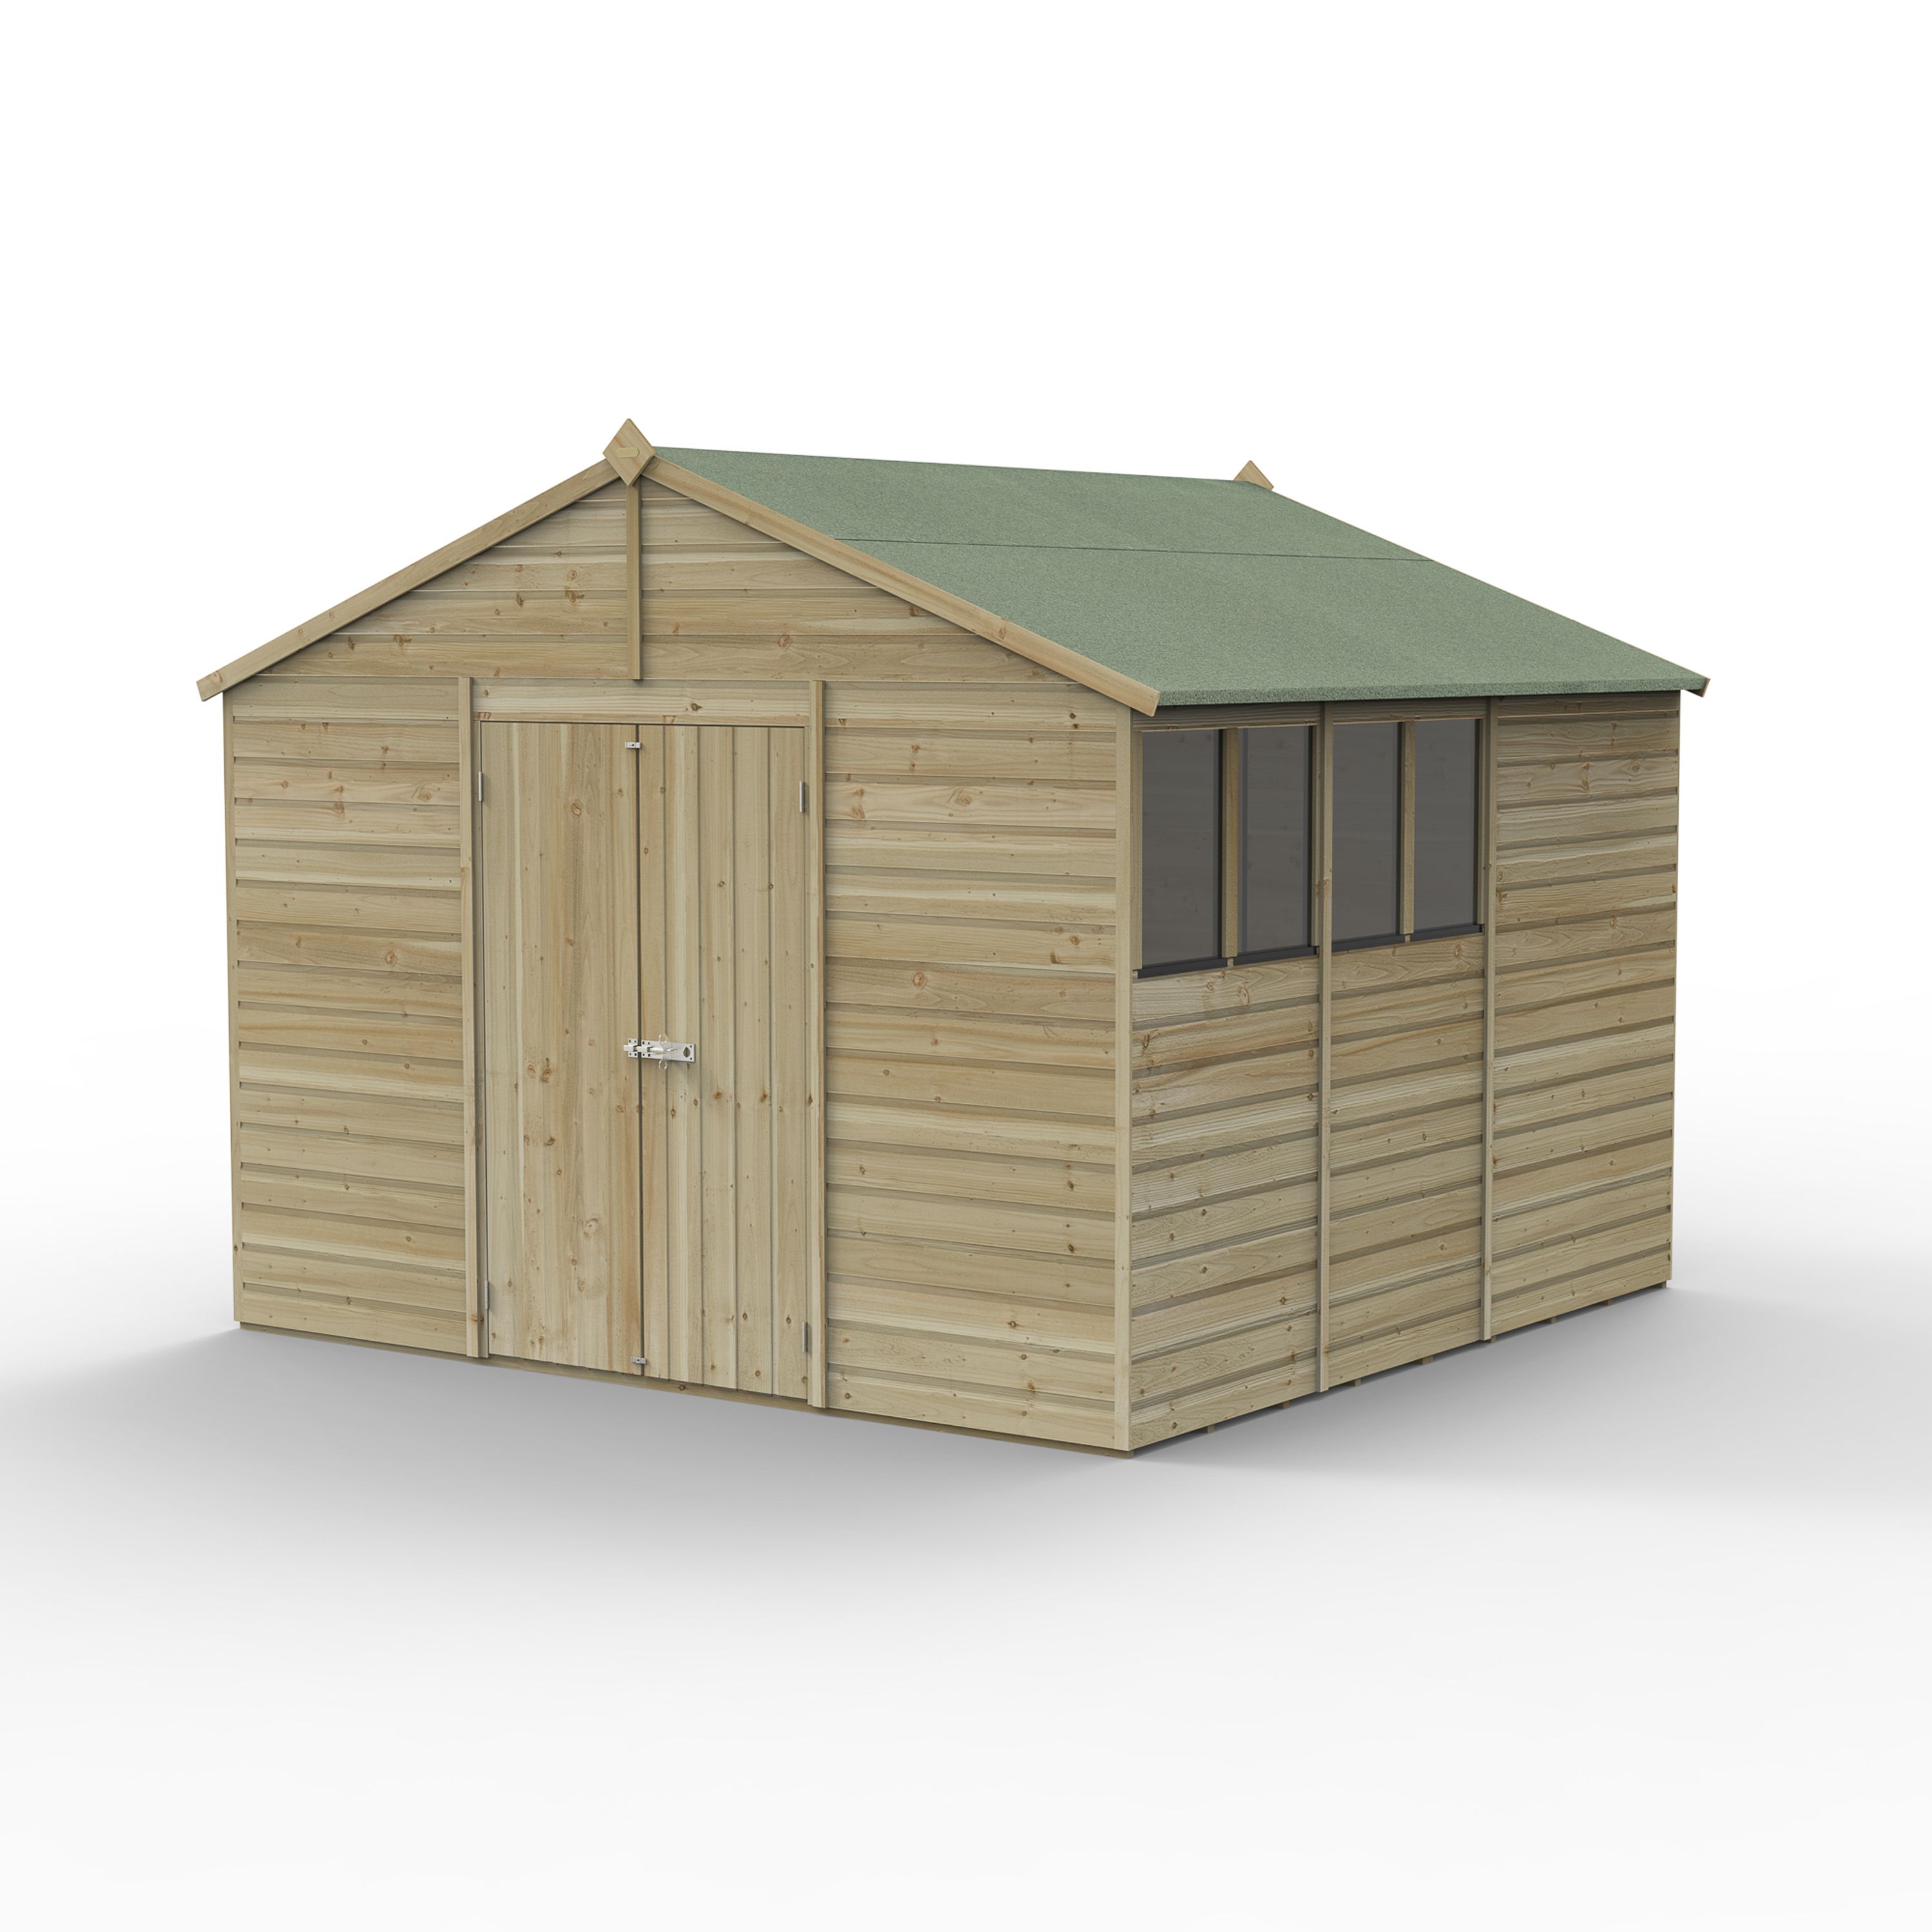 Forest Garden Beckwood 10x10 ft Apex Natural timber Wooden 2 door Shed with floor & 4 windows (Base included)